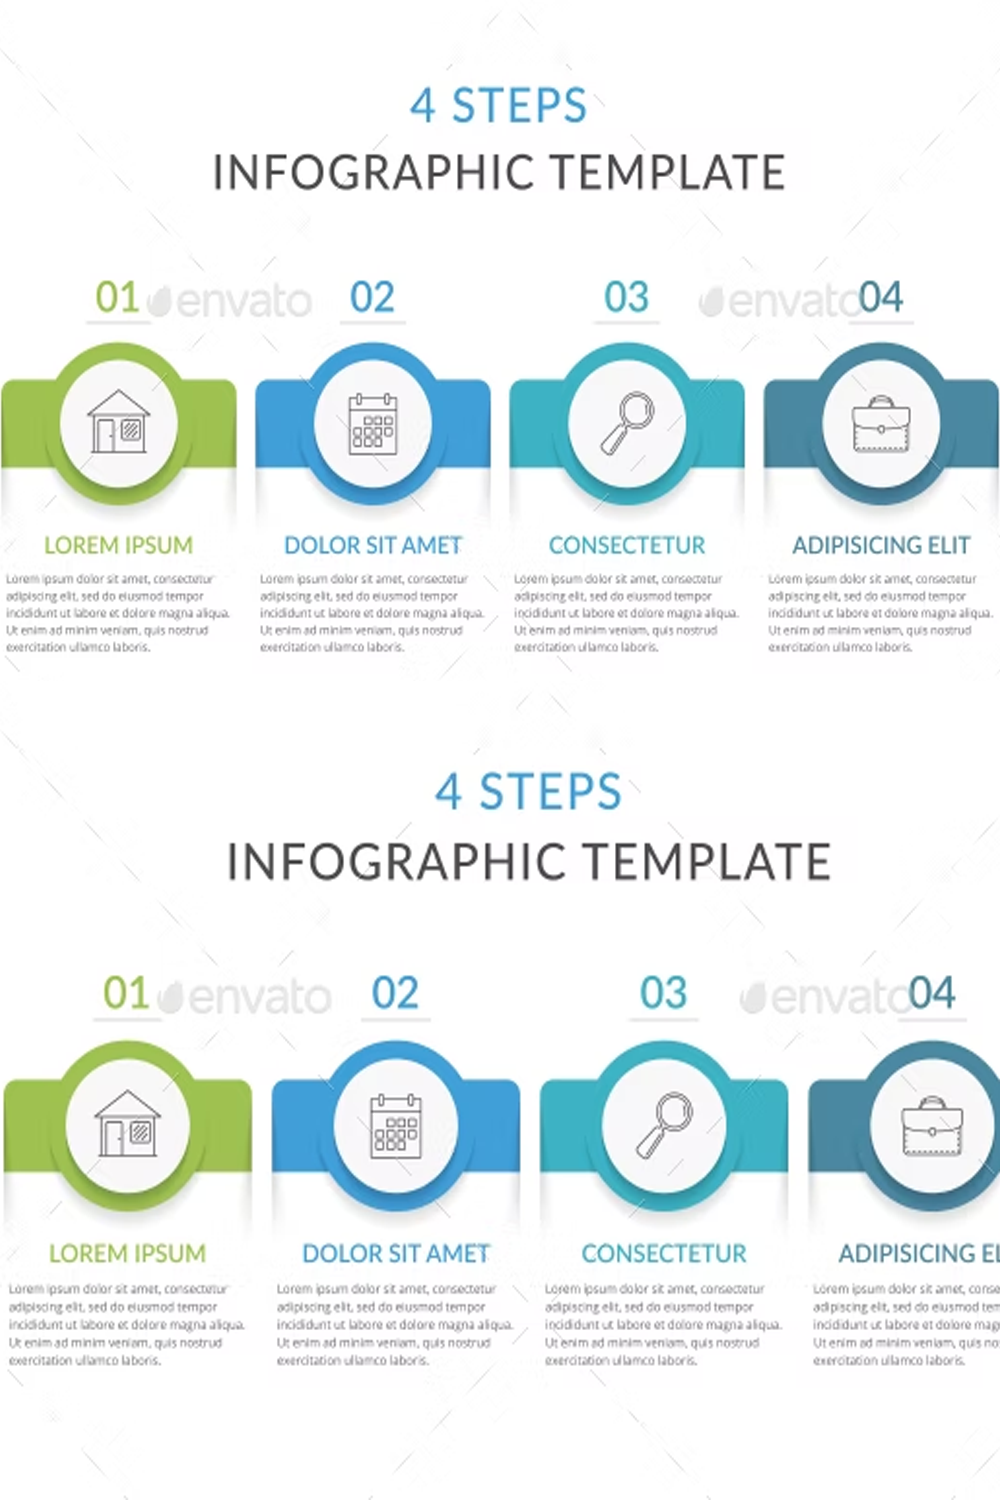 Illustrations 4 steps infographic template of pinterest.